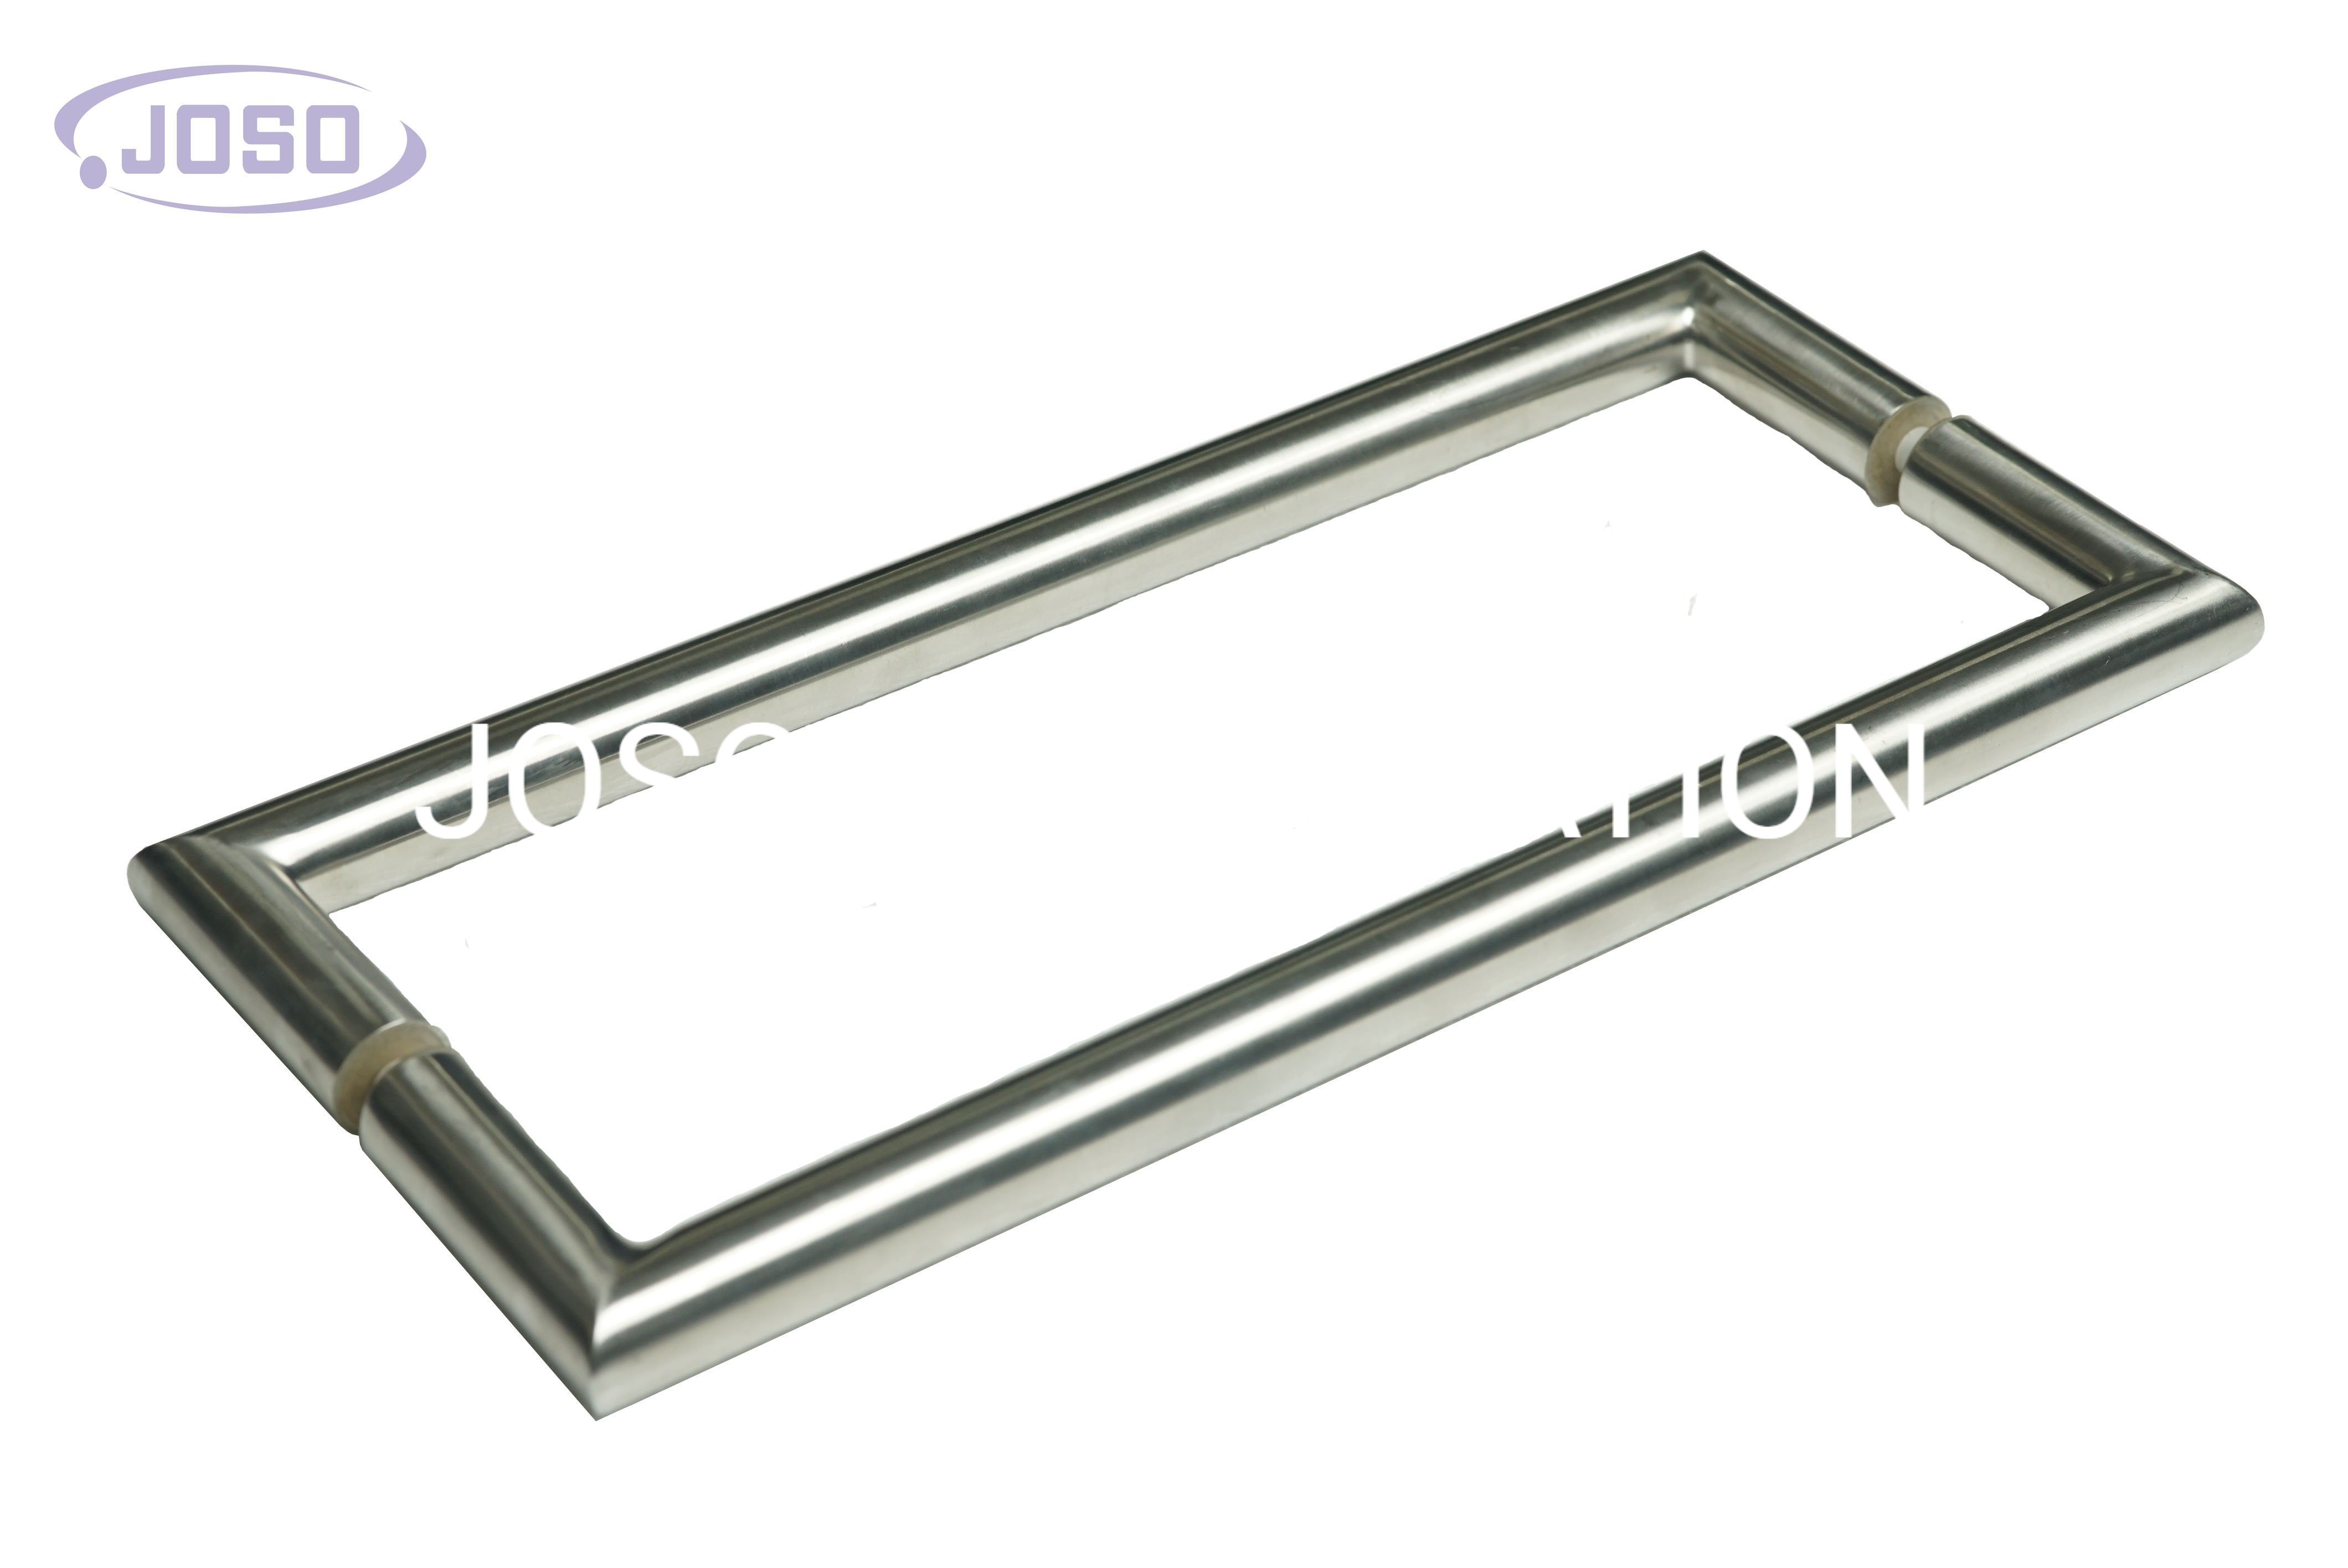 Tempered Tubular Stainless Steel Big Glass Door Handles Stainless Steel Puller Handle Modern Style Cc375